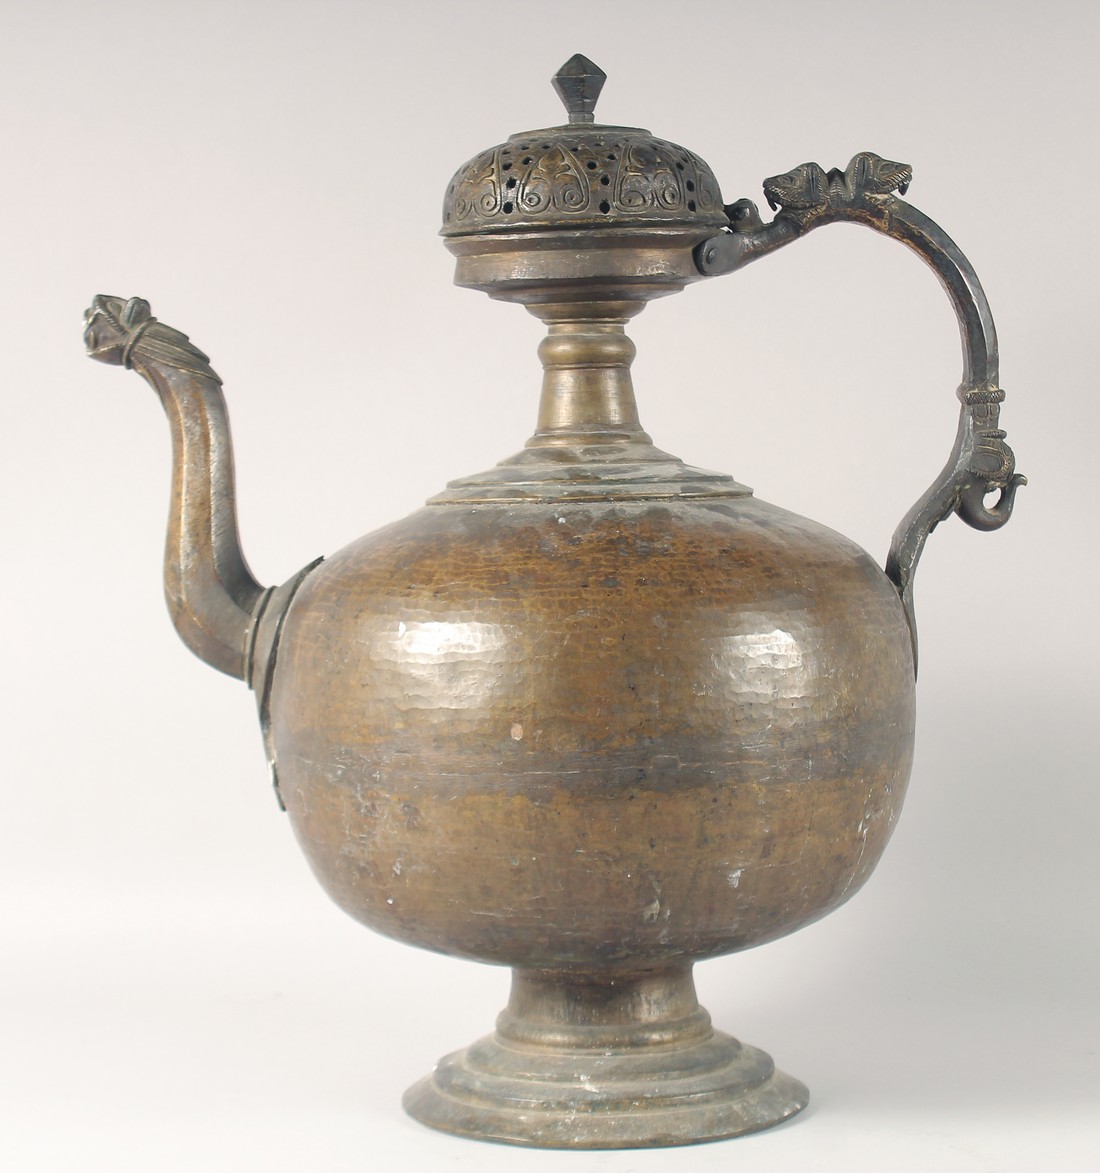 A LARGE 17TH CENTURY INDIAN BRONZE EWER, with zoomorphic handle and spout, 55cm high.